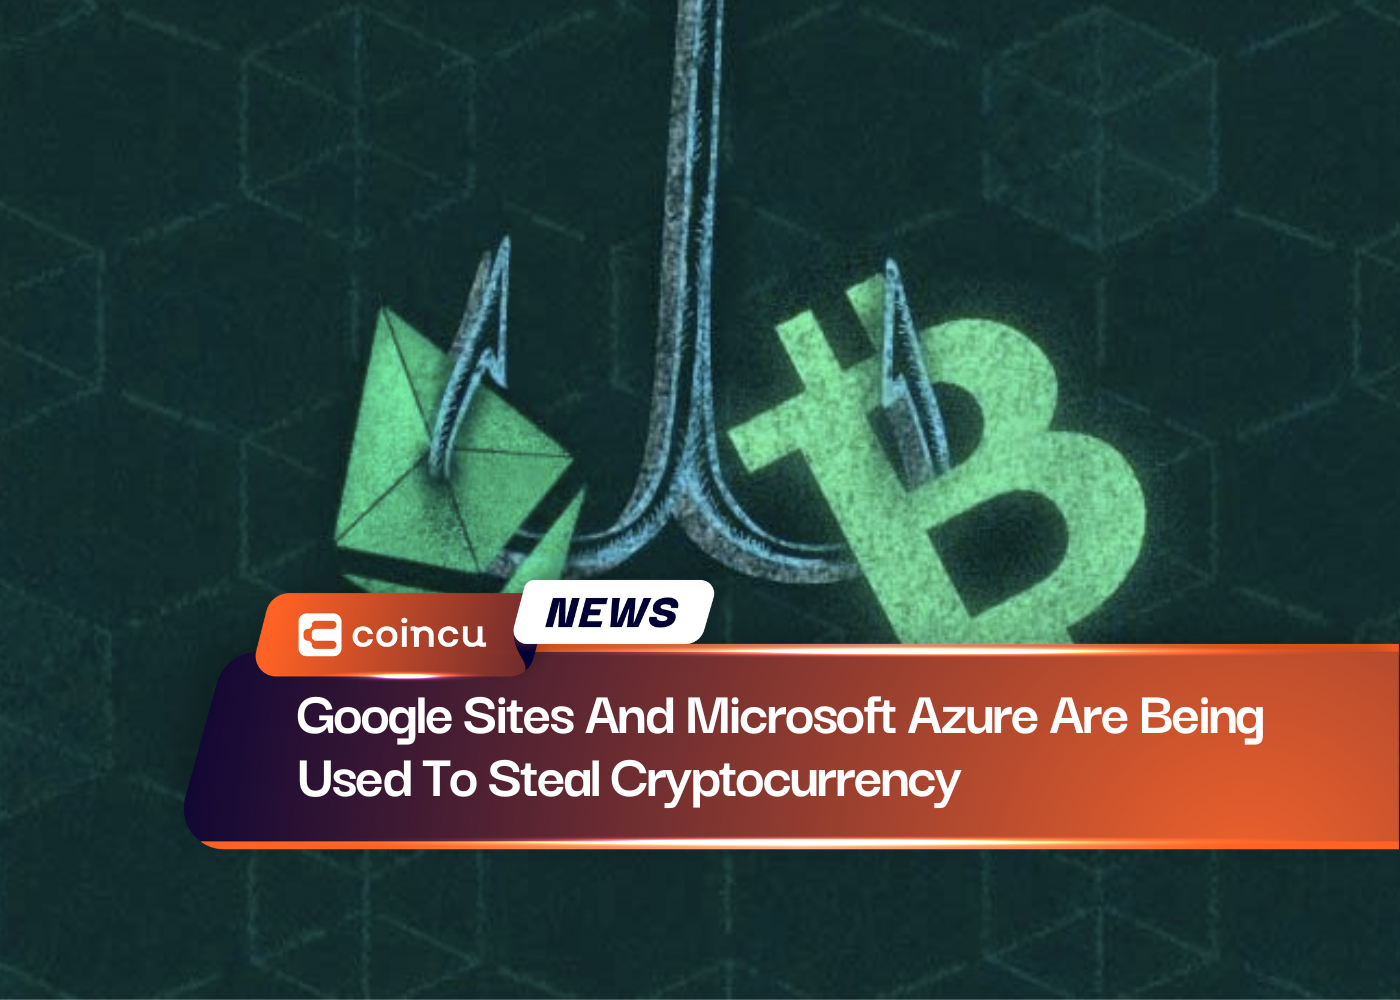 Google Sites And Microsoft Azure Are Being Used To Steal Cryptocurrency